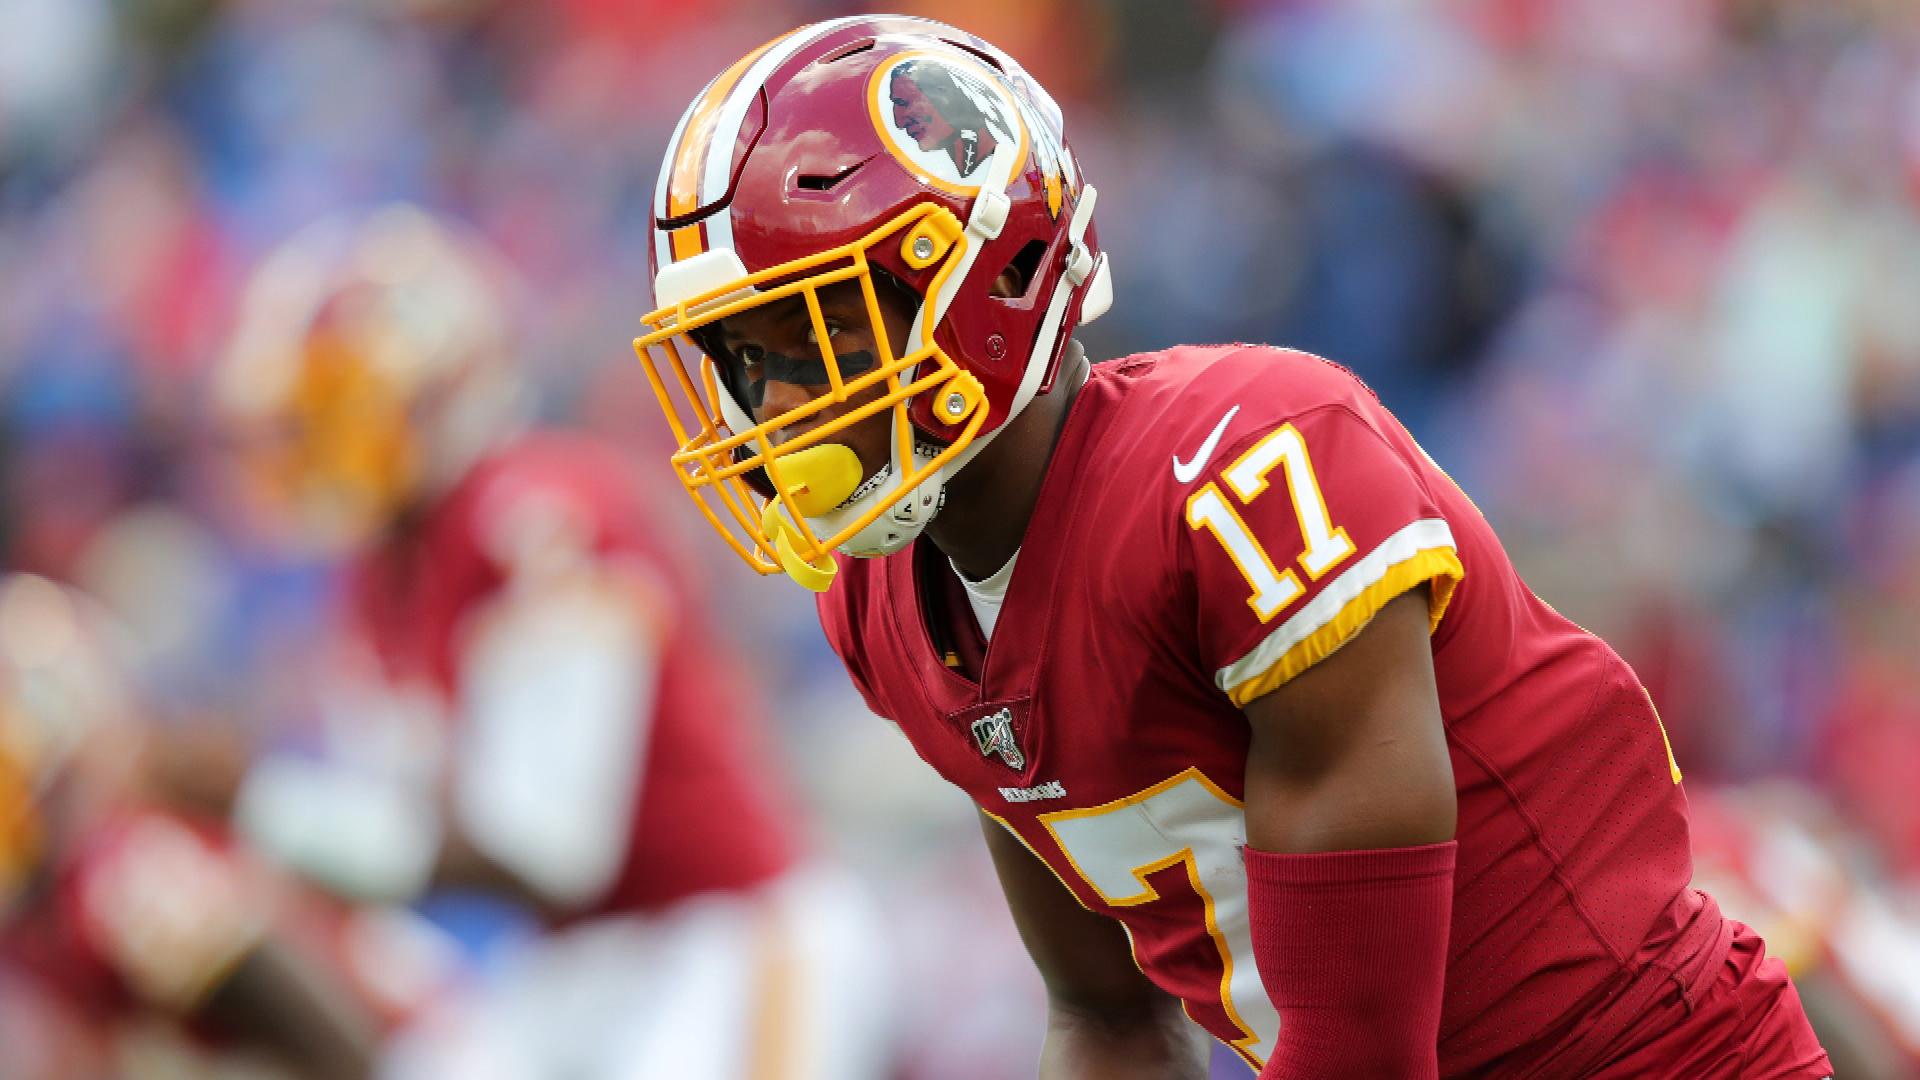 Redskins' Terry McLaurin, Dwayne Haskins have potential vs. Jets secondary